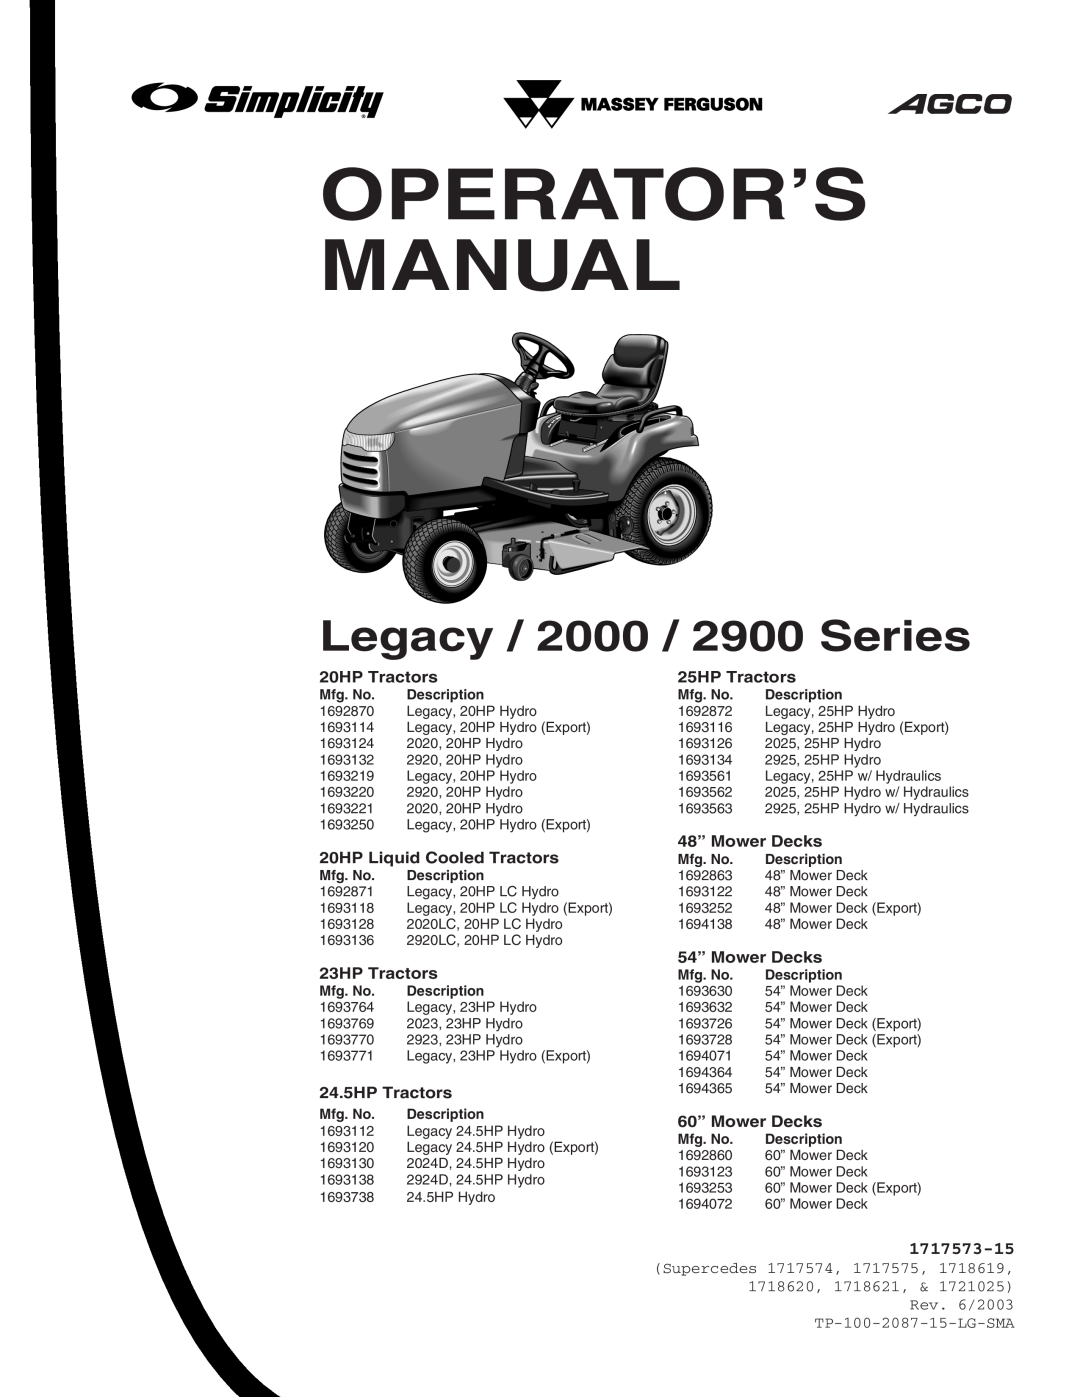 Simplicity 1693764, 1693738, 1693770, 1693771, 1693769 Operator’S Manual, Legacy / 2000 / 2900 Series, 1717573-15, Supercedes 